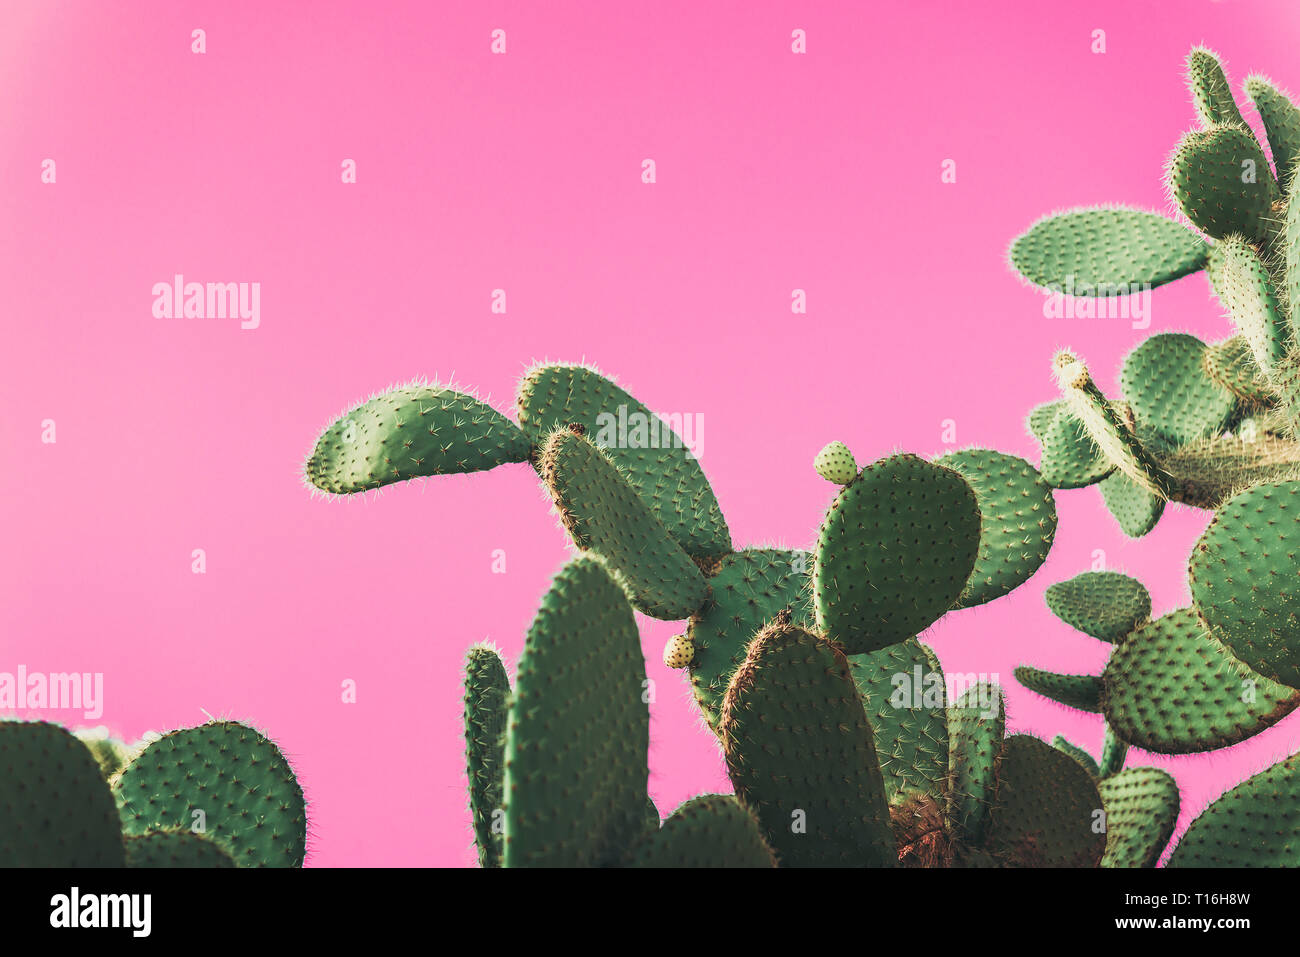 green Prickly Pear Cactus on pink background, creative pop art style with  pastel shades, copy space for text Stock Photo - Alamy